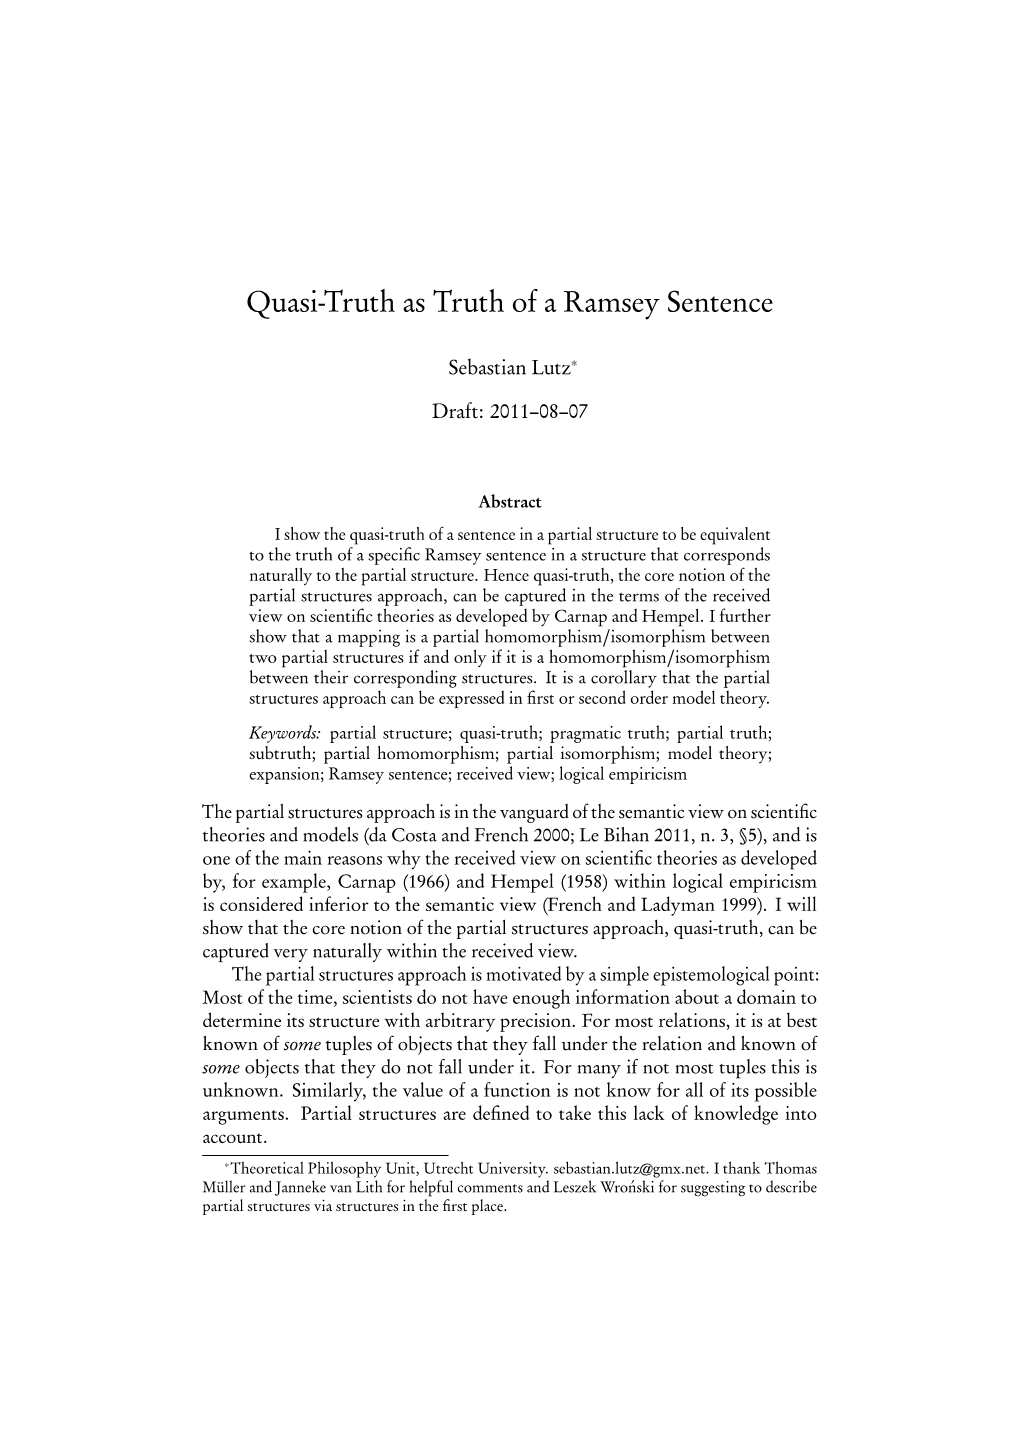 Quasi-Truth As Truth of a Ramsey Sentence